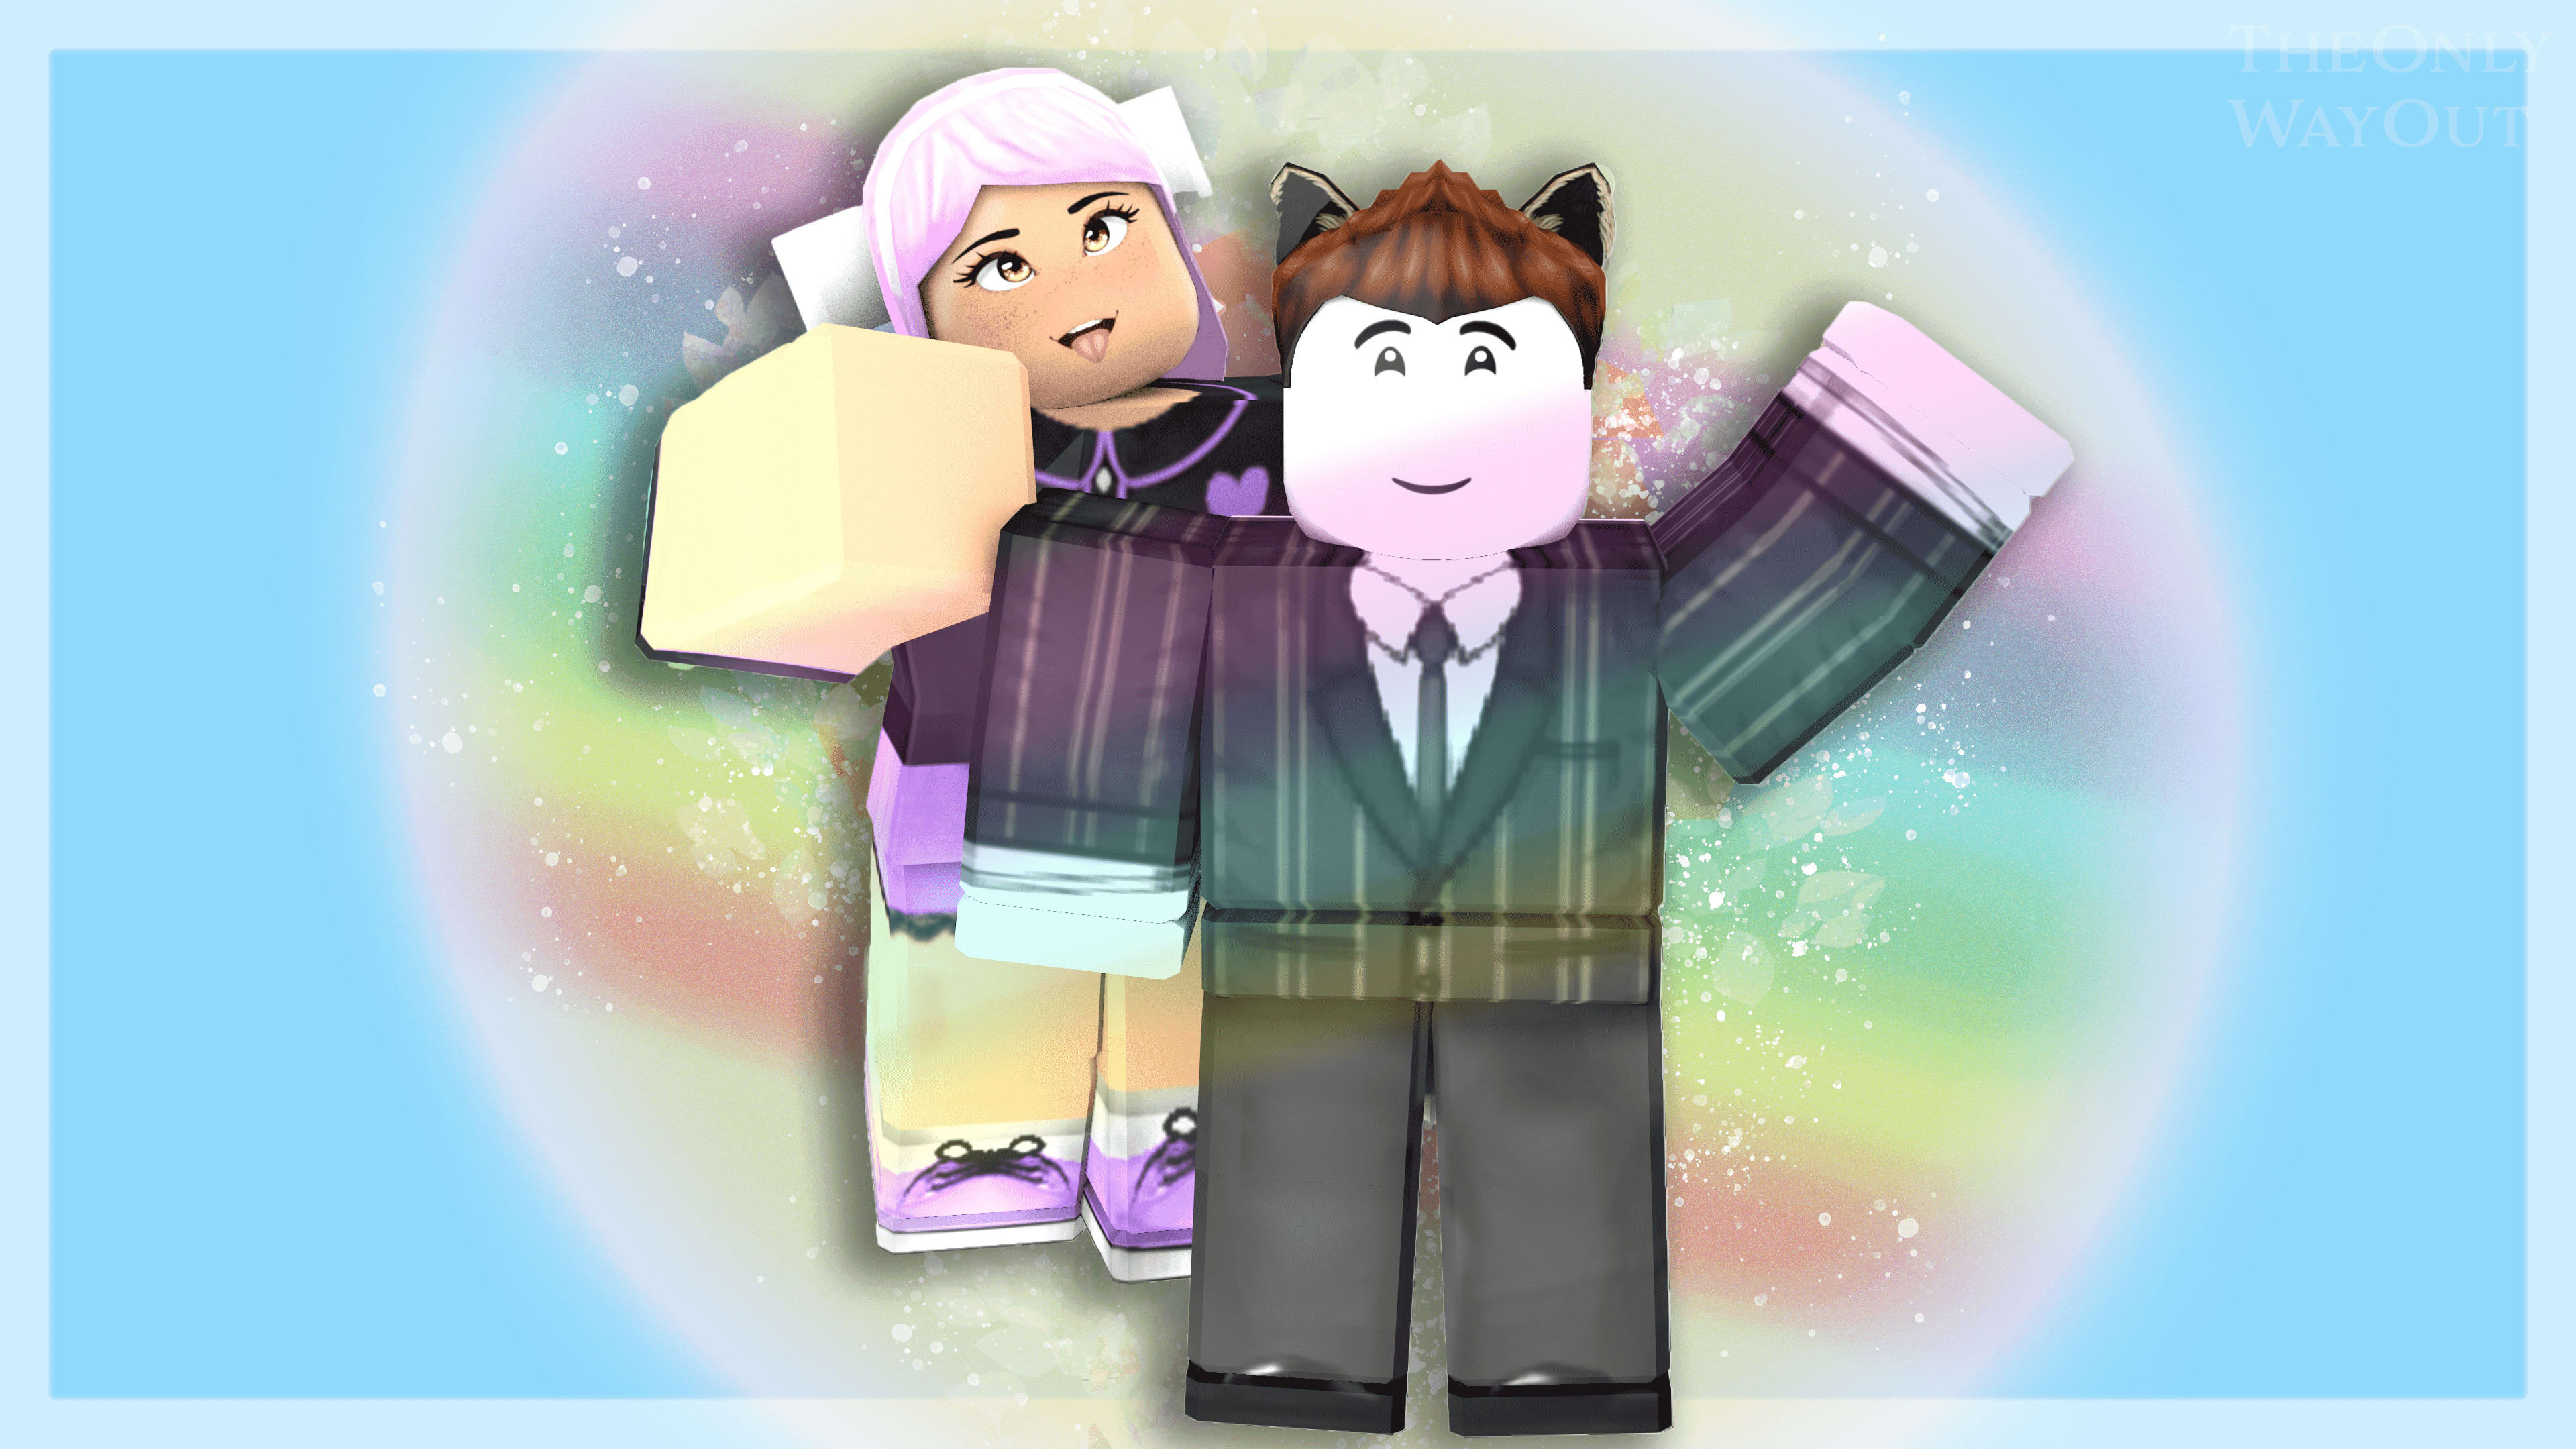 Make you a custom roblox gfx of your avatar by Coolaubrey57